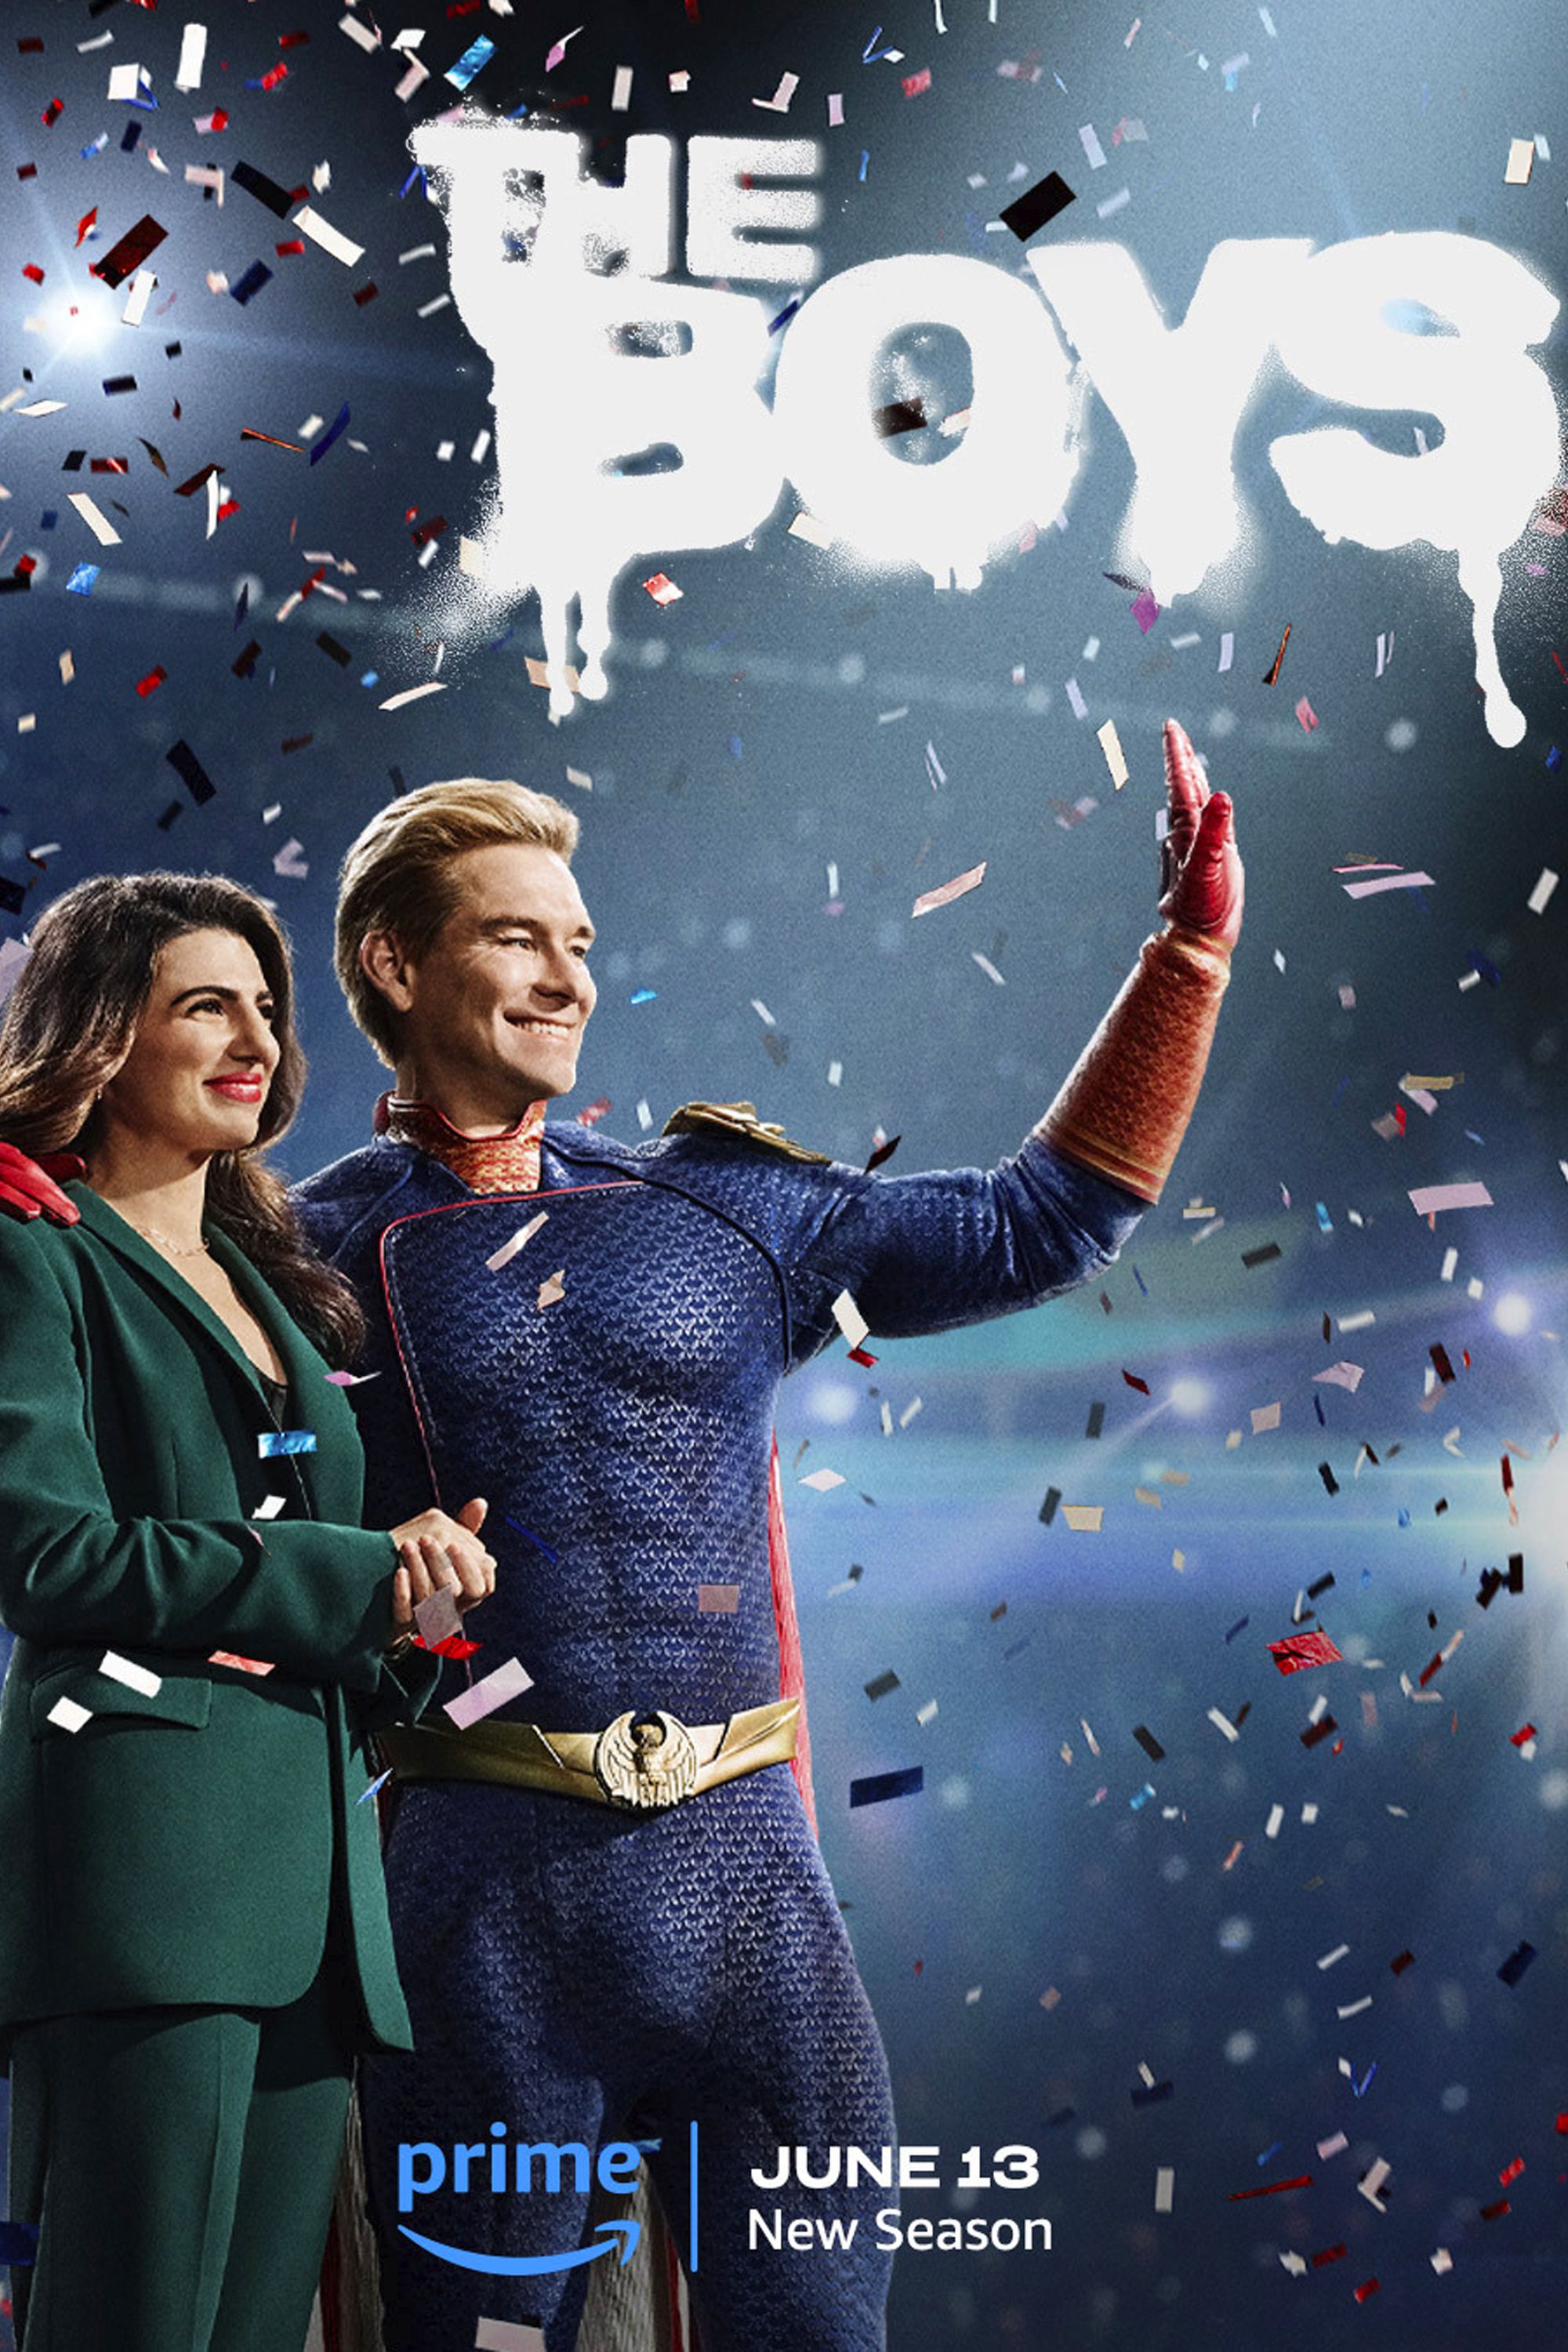 The Boys Season 4 Poster Showing Homelander with Victoria Neuman Surrounded by Confetti